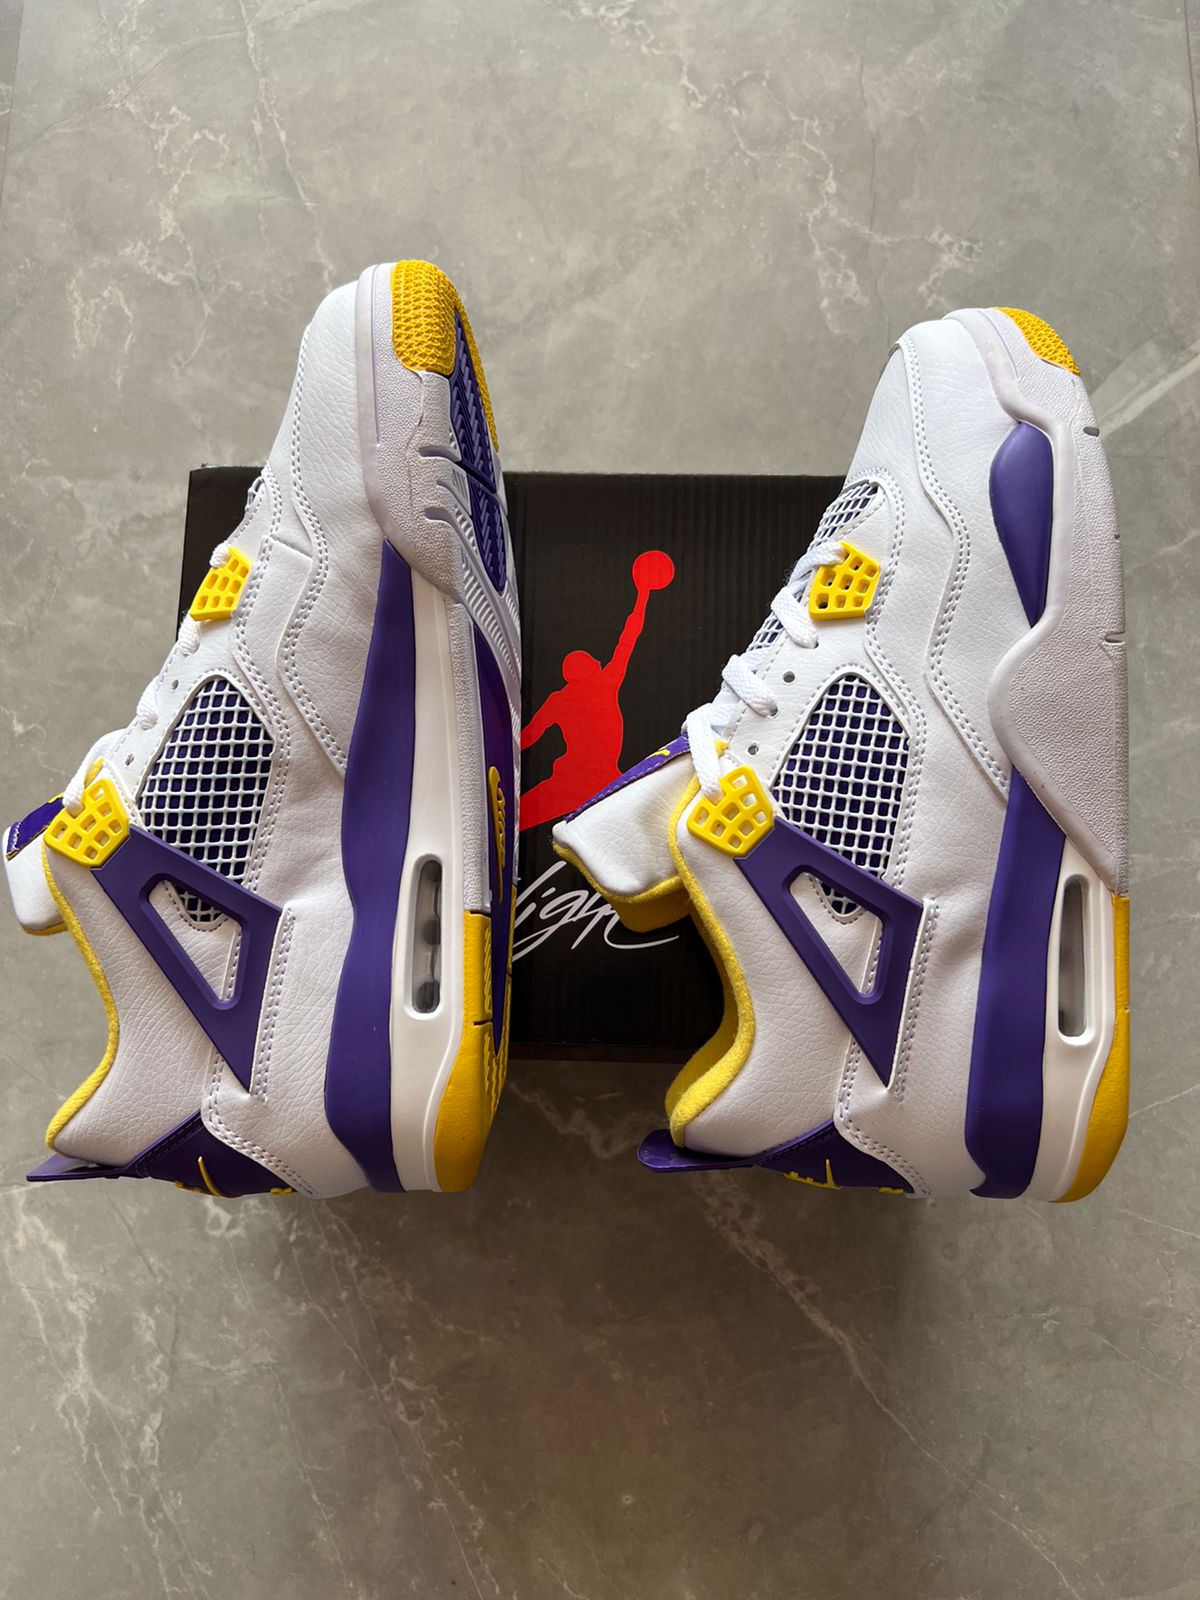 Imported Retro Lakers Home Sneakers In Stock